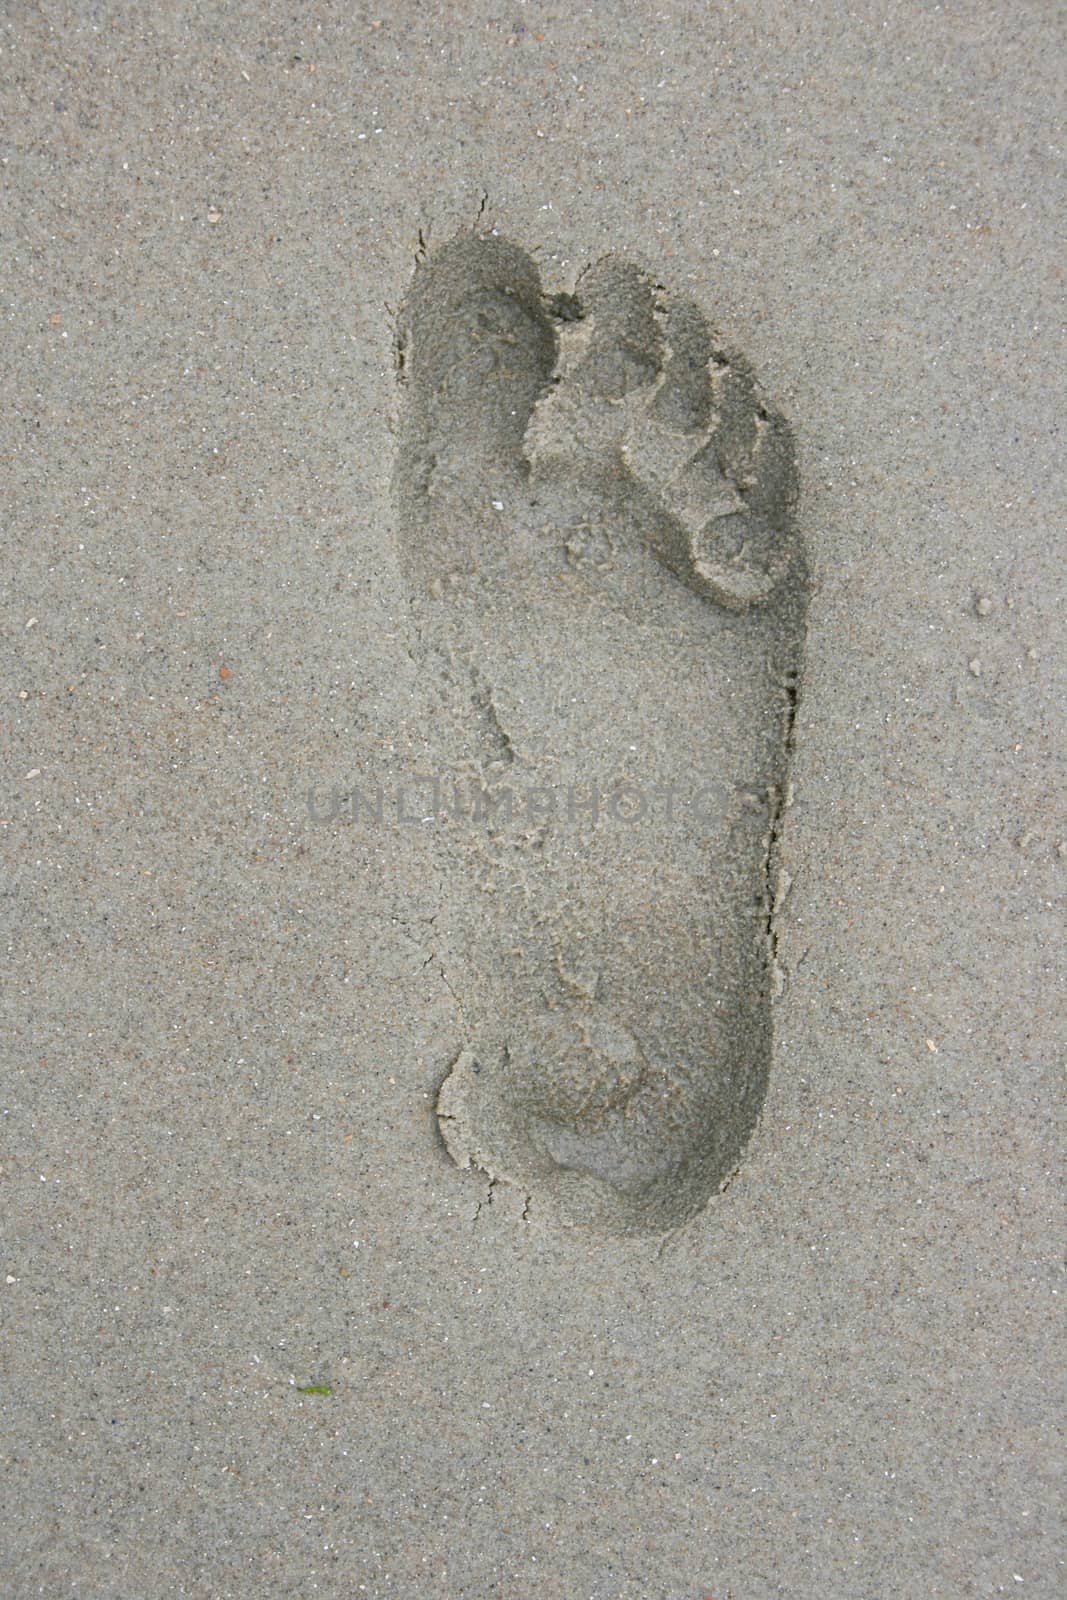 A Human Footprint in the sand